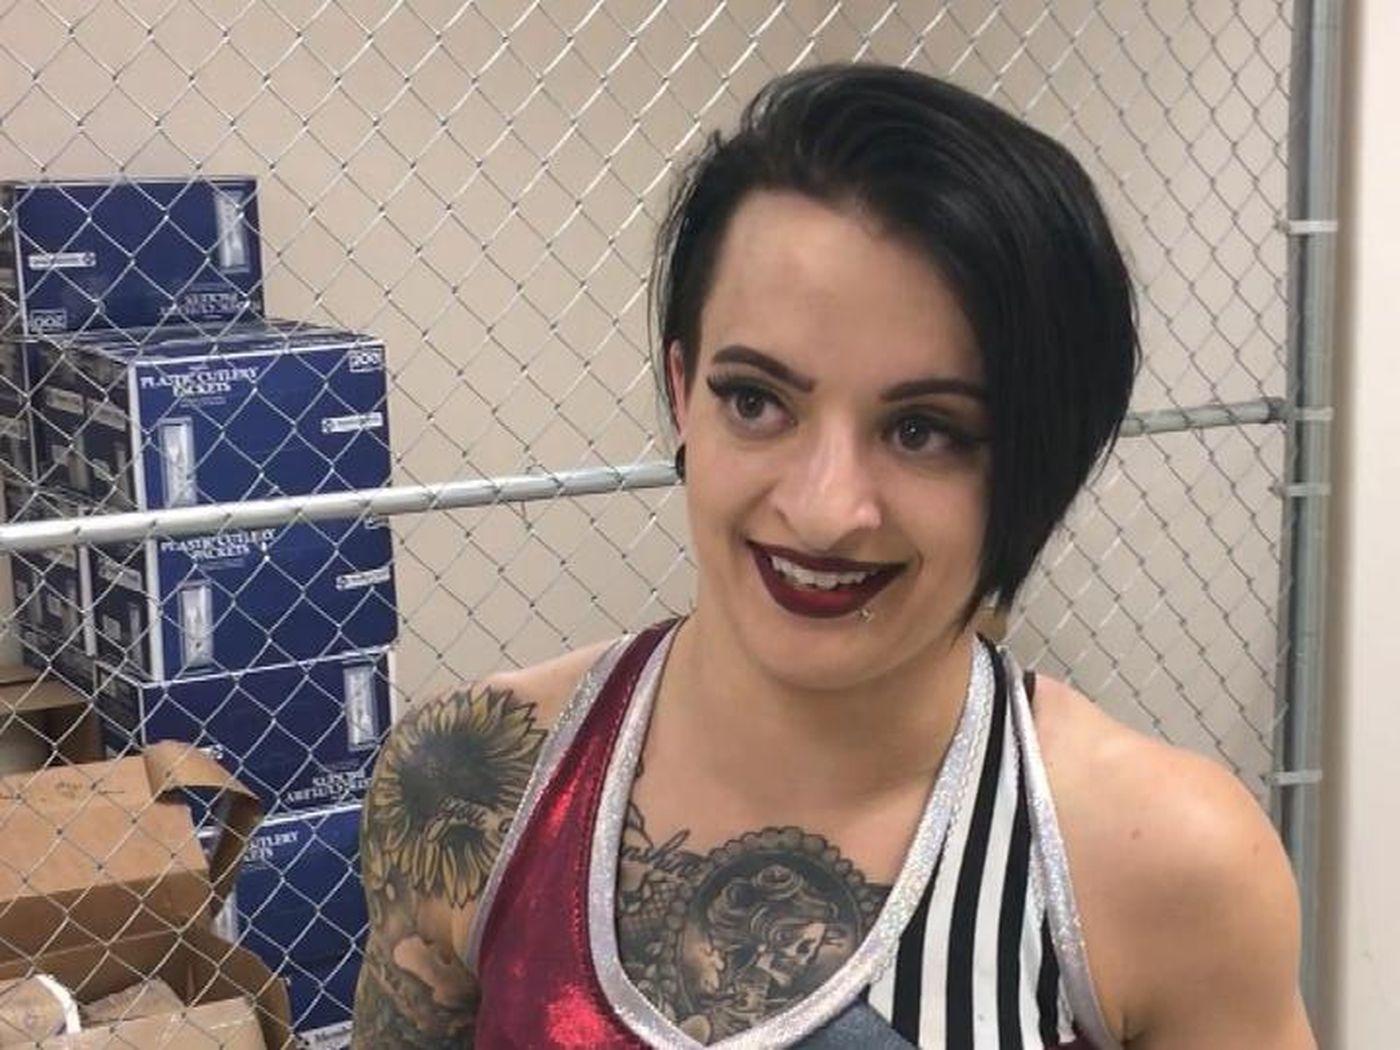 Ruby Riot introduces herself to WWE, says she's 'here to show Nik...